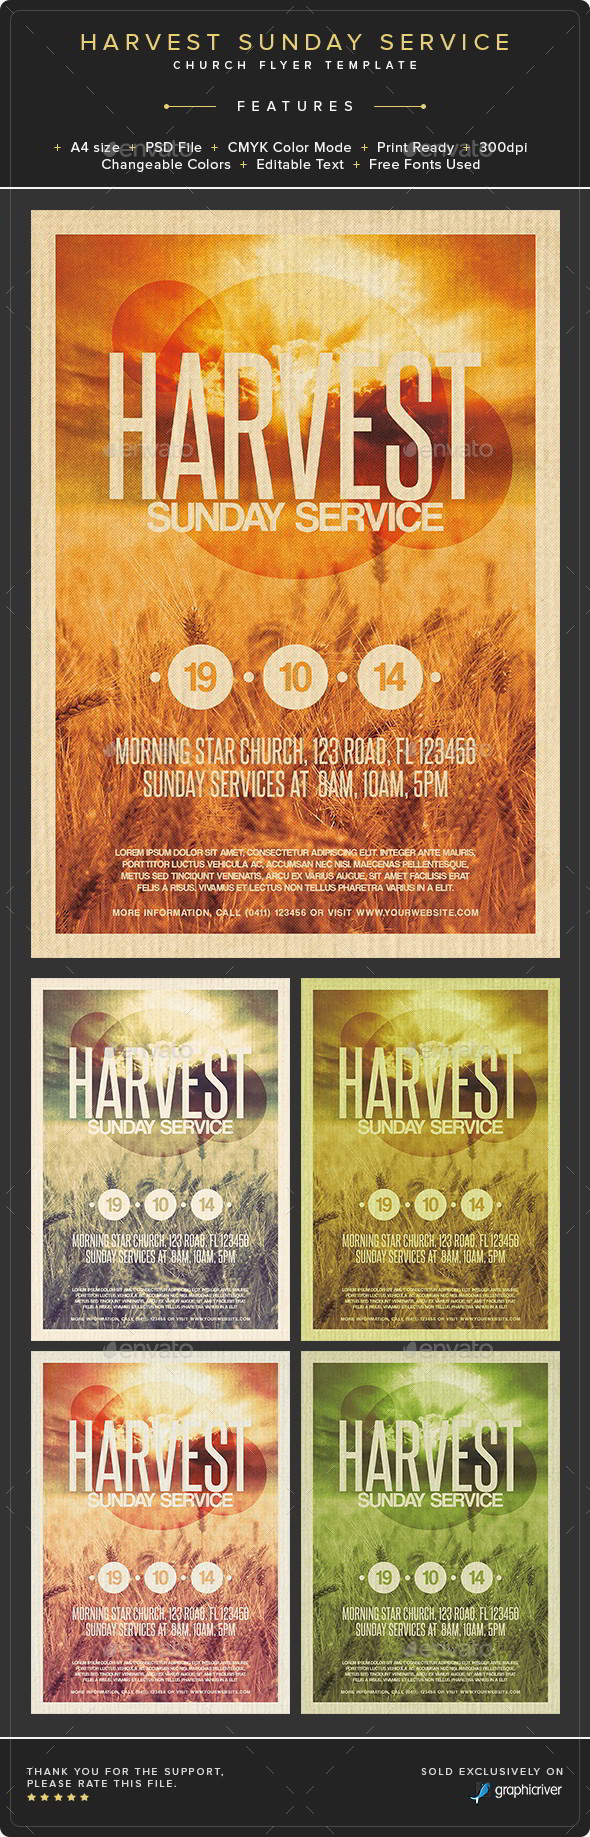 Harvest sunday service flyer template preview